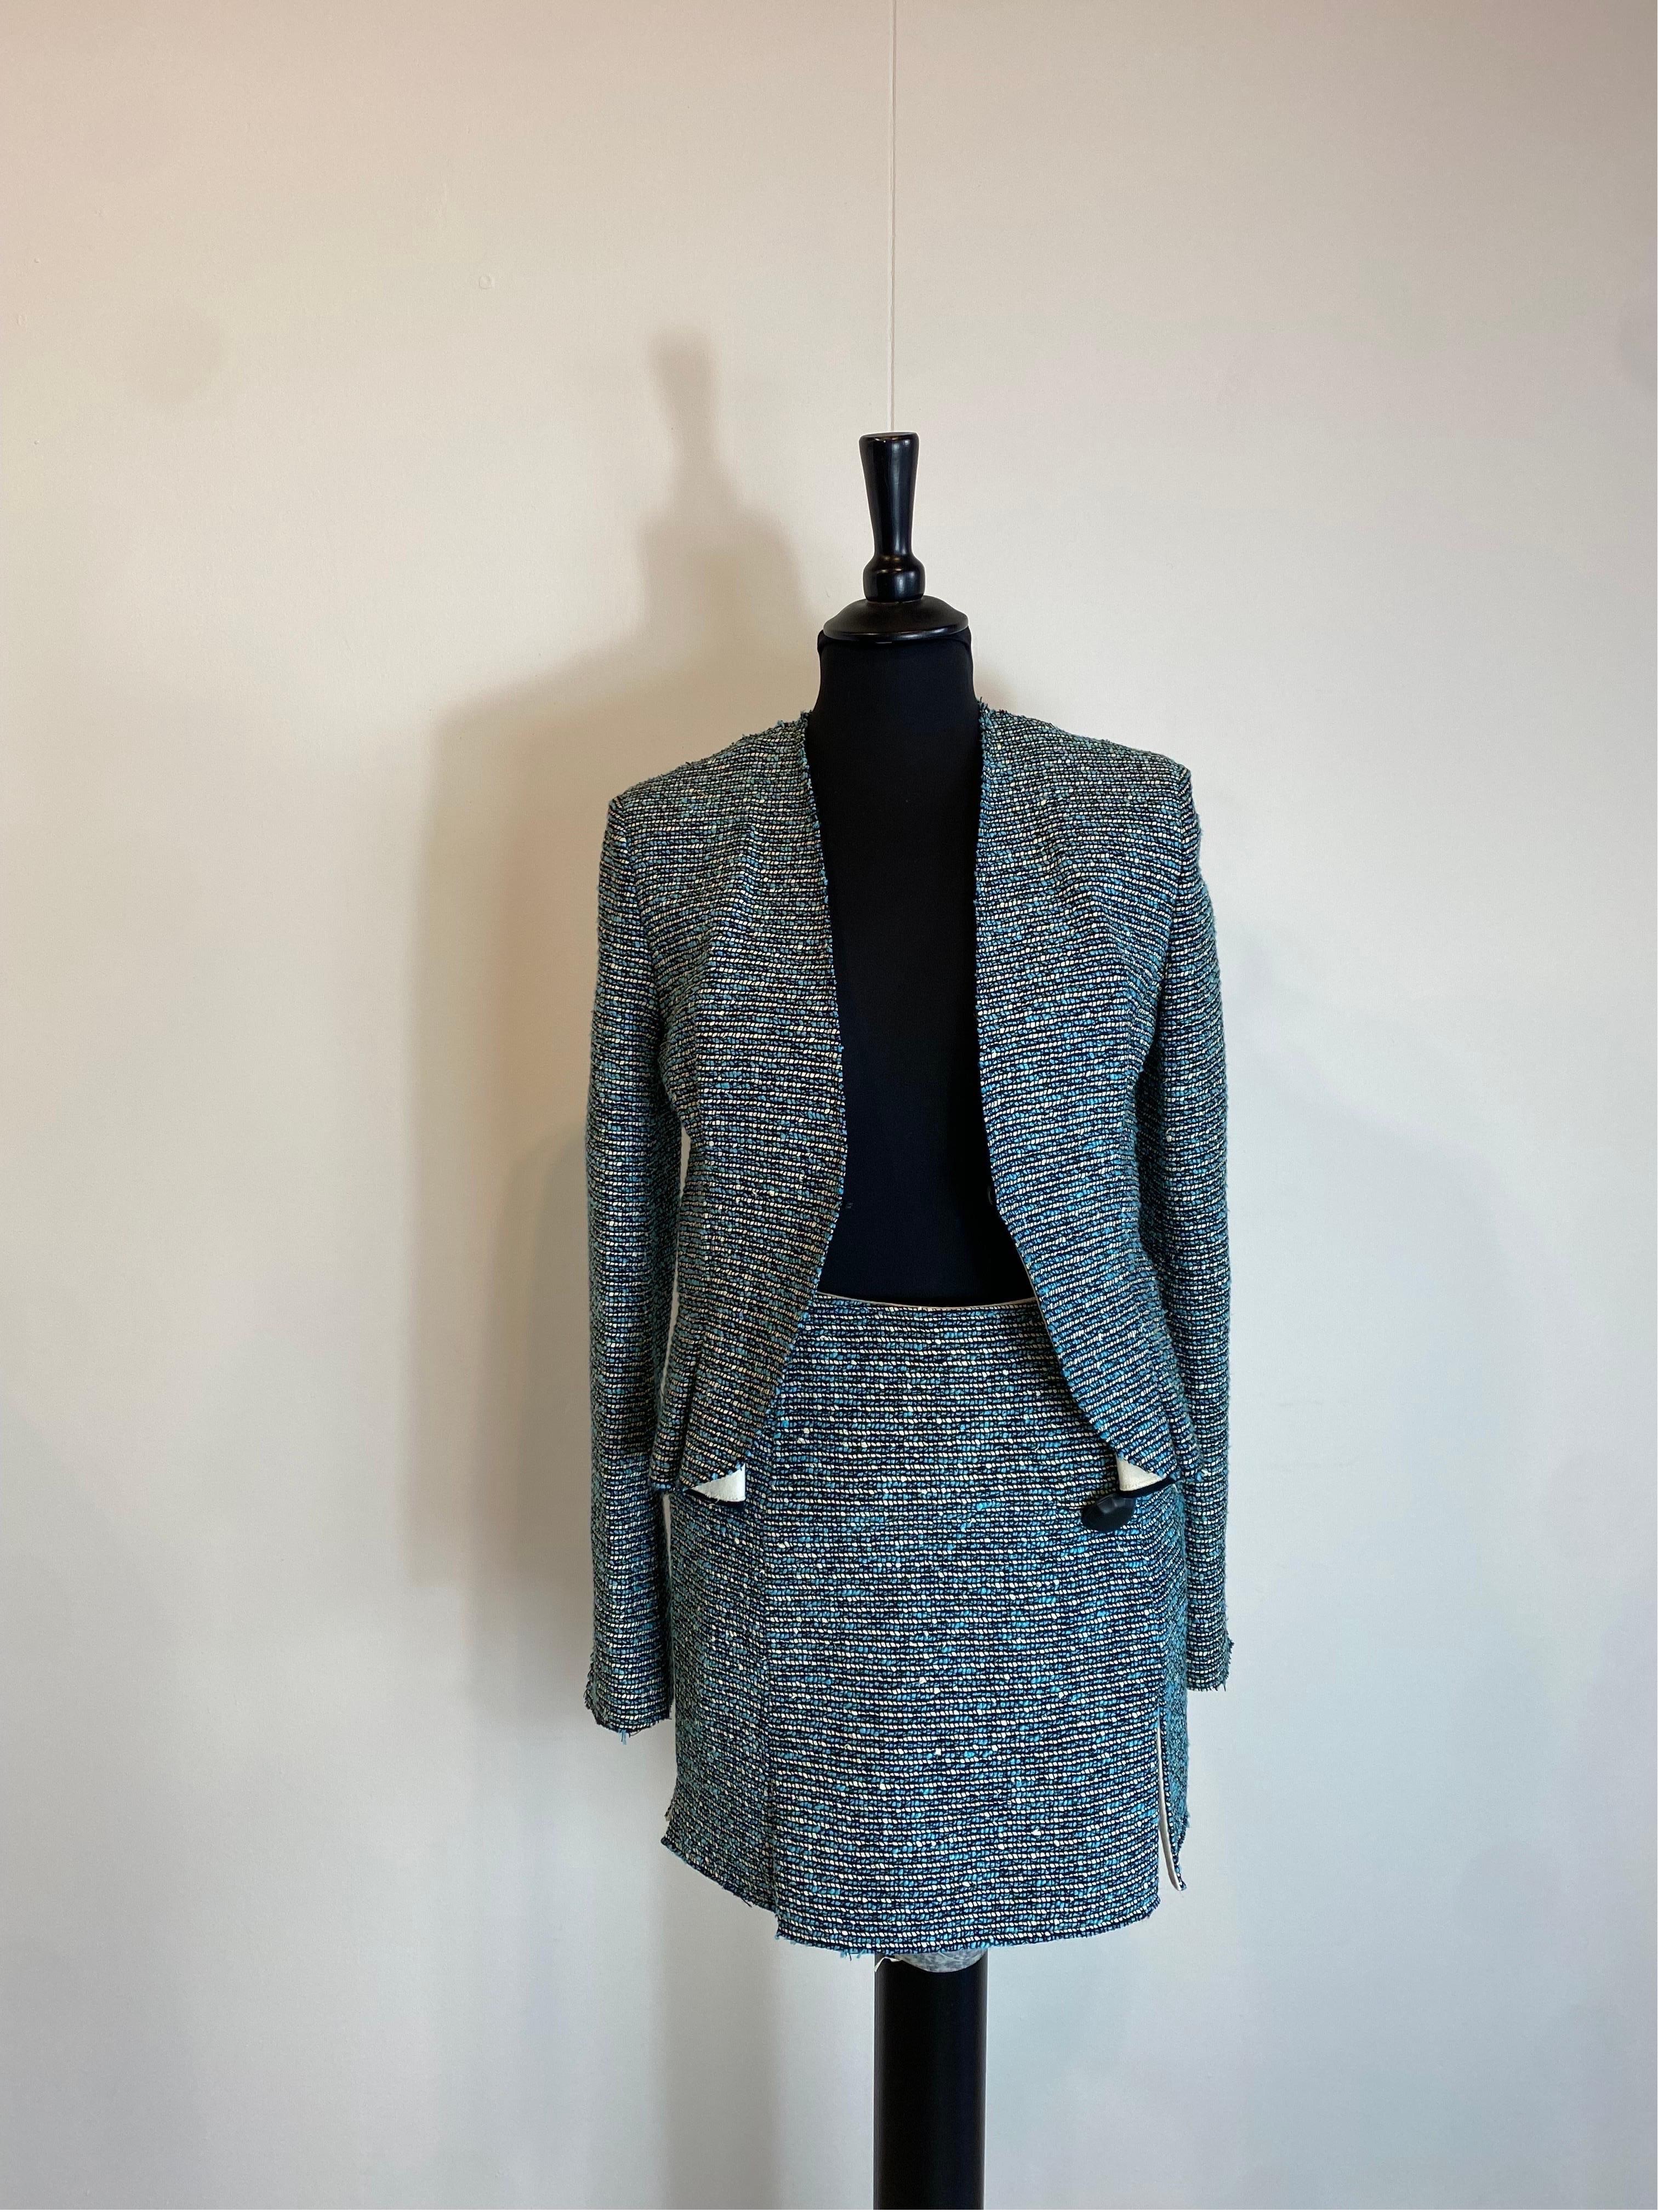 Balenciaga SS 13 Jacket and Skirt Suit In Excellent Condition For Sale In Carnate, IT